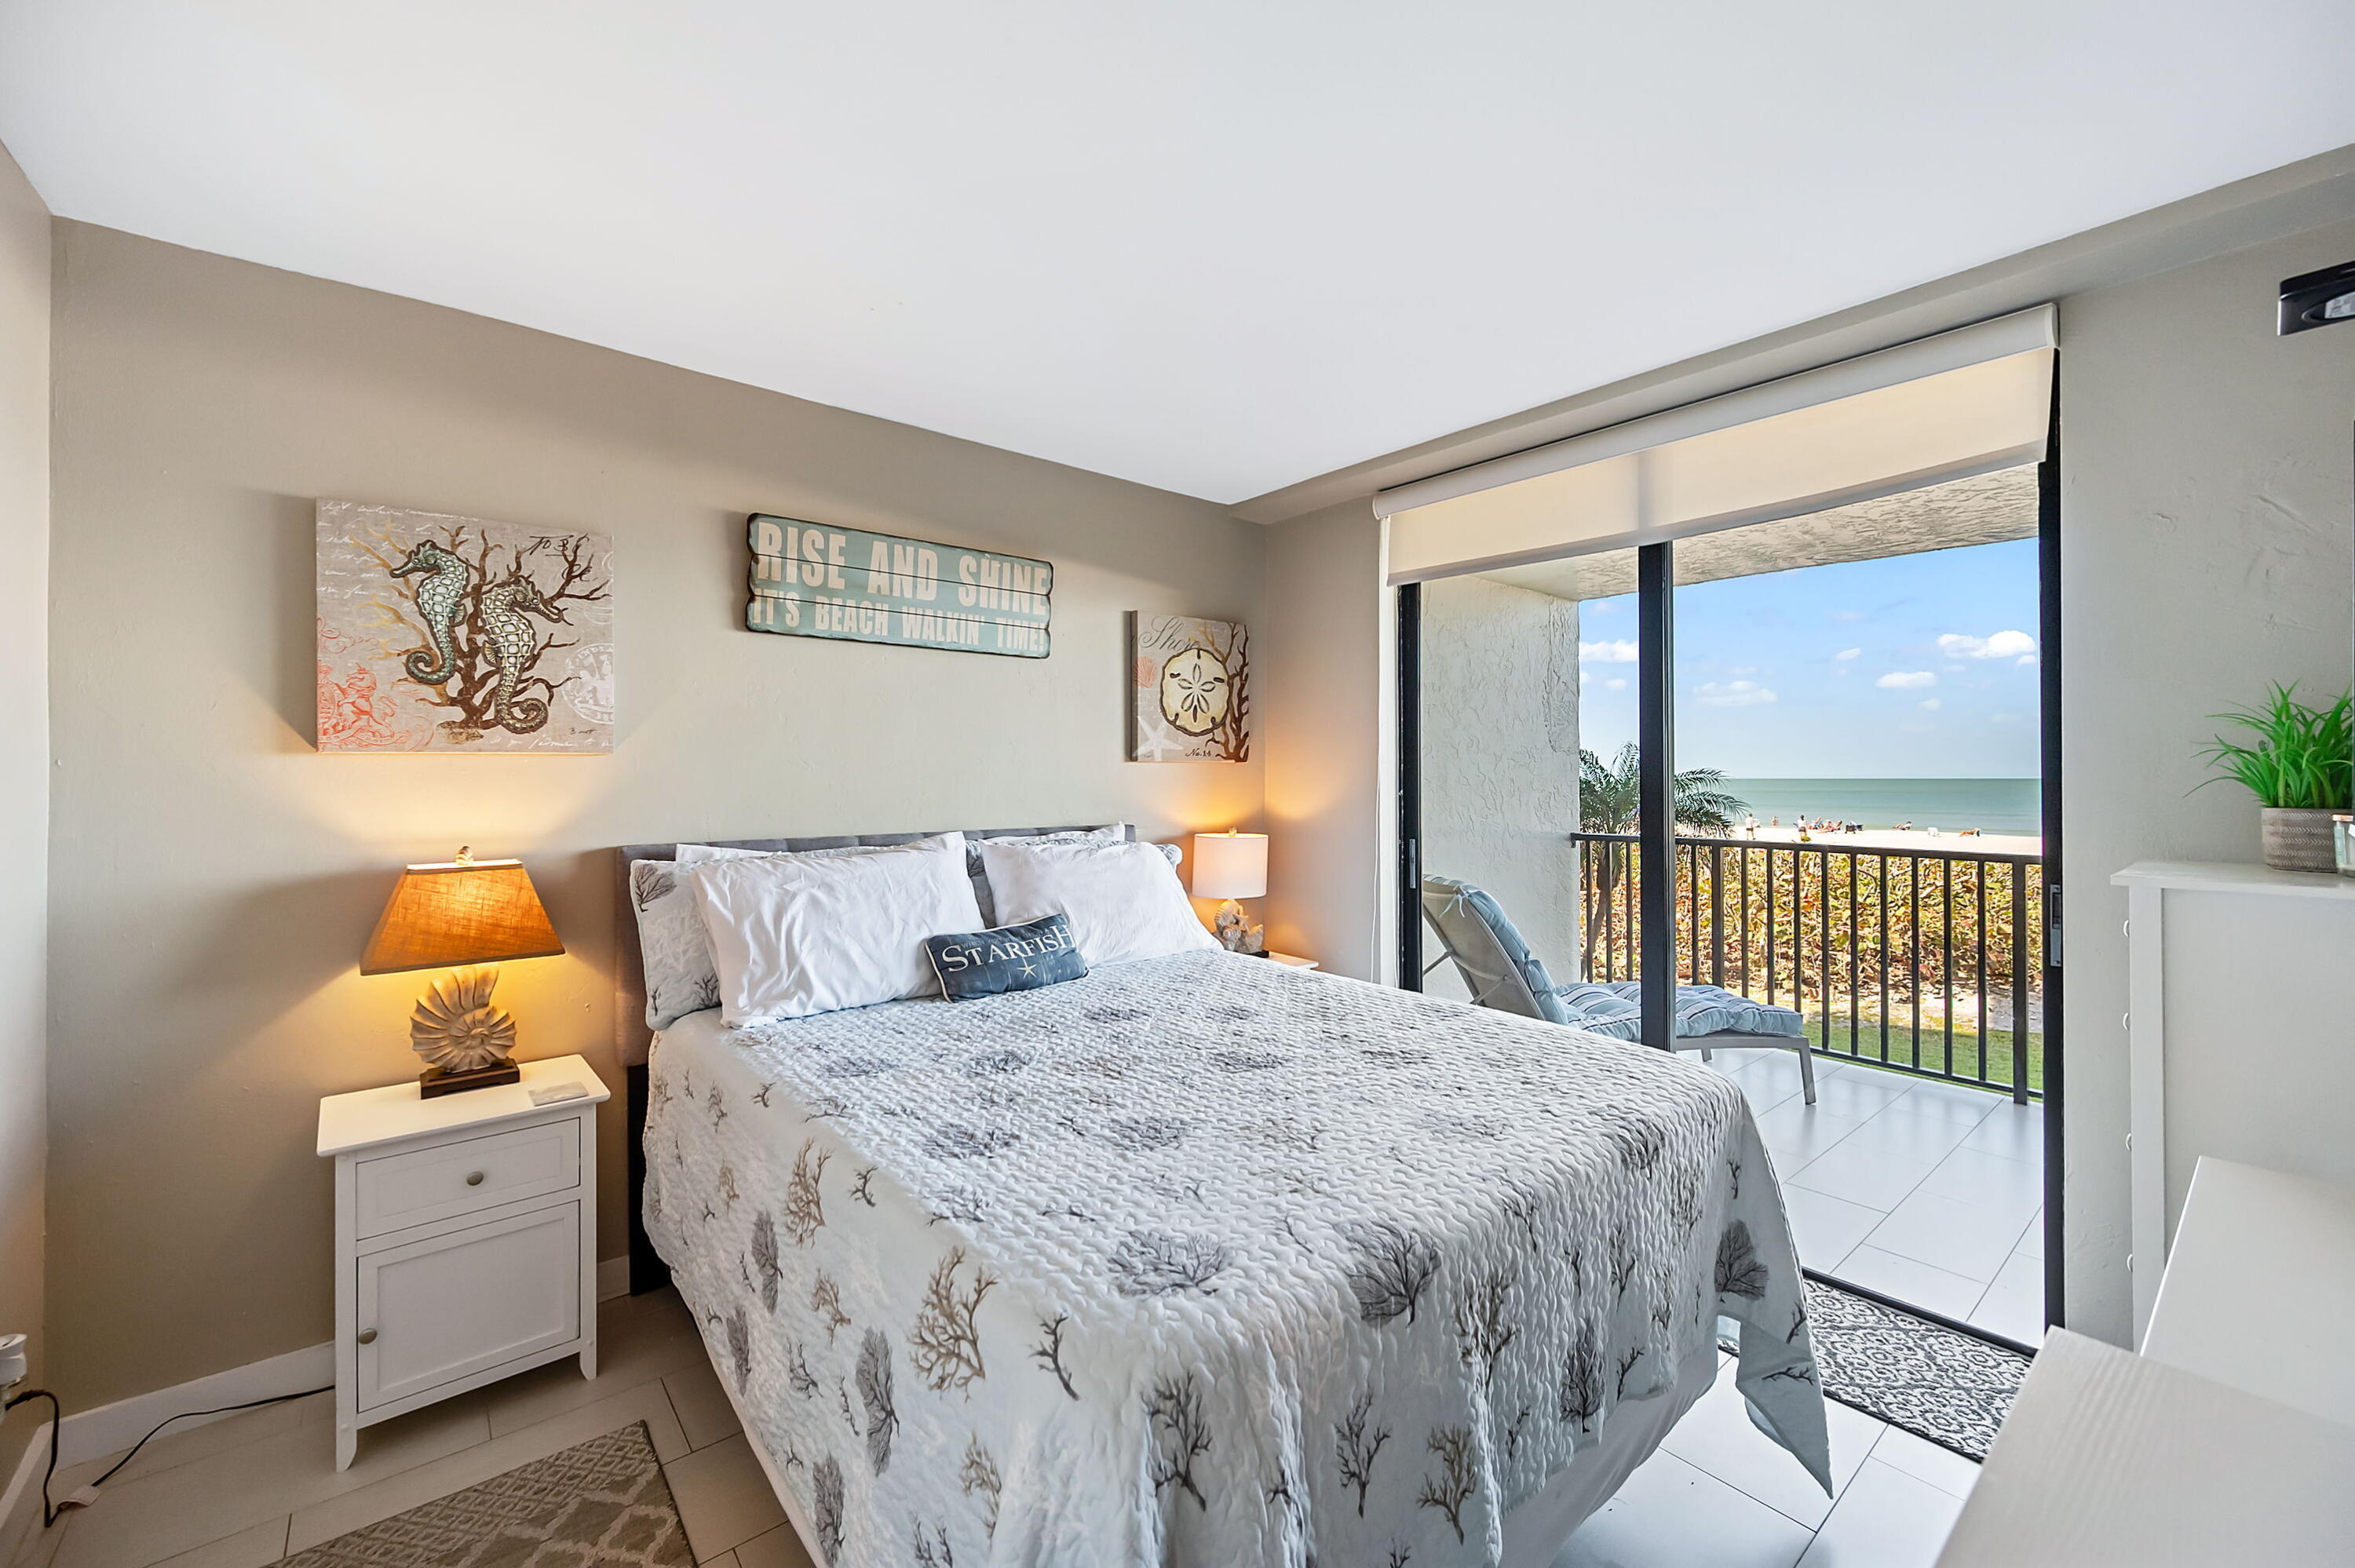 890 S Collier Boulevard Unit 103, Marco Island, Florida, 34145, United States, 2 Bedrooms Bedrooms, ,2 BathroomsBathrooms,Residential,For Sale,890 S Collier Boulevard Unit 103,1479272